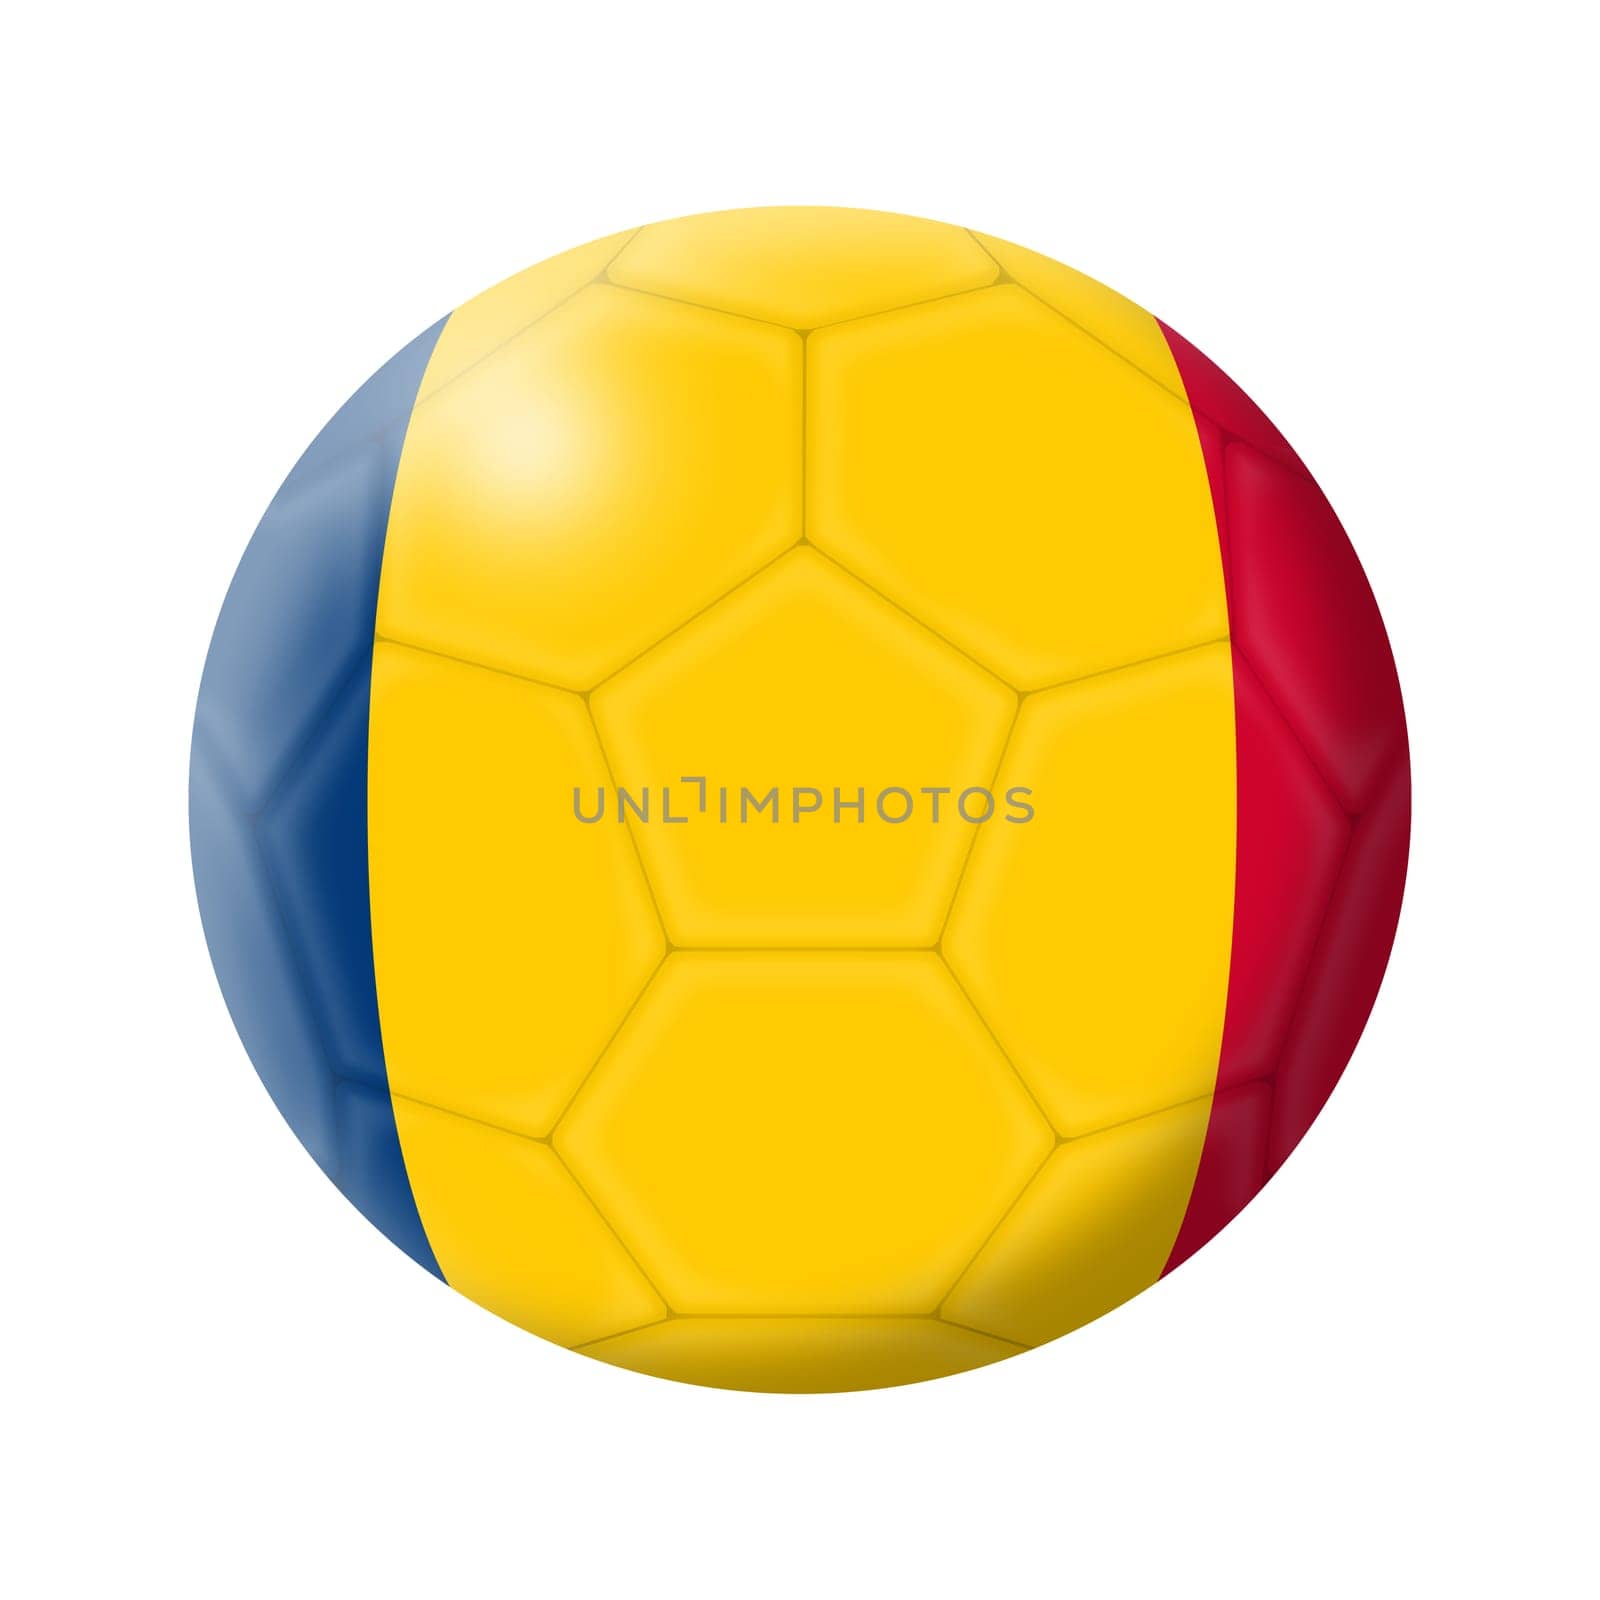 Chad soccer ball football illustration by VivacityImages